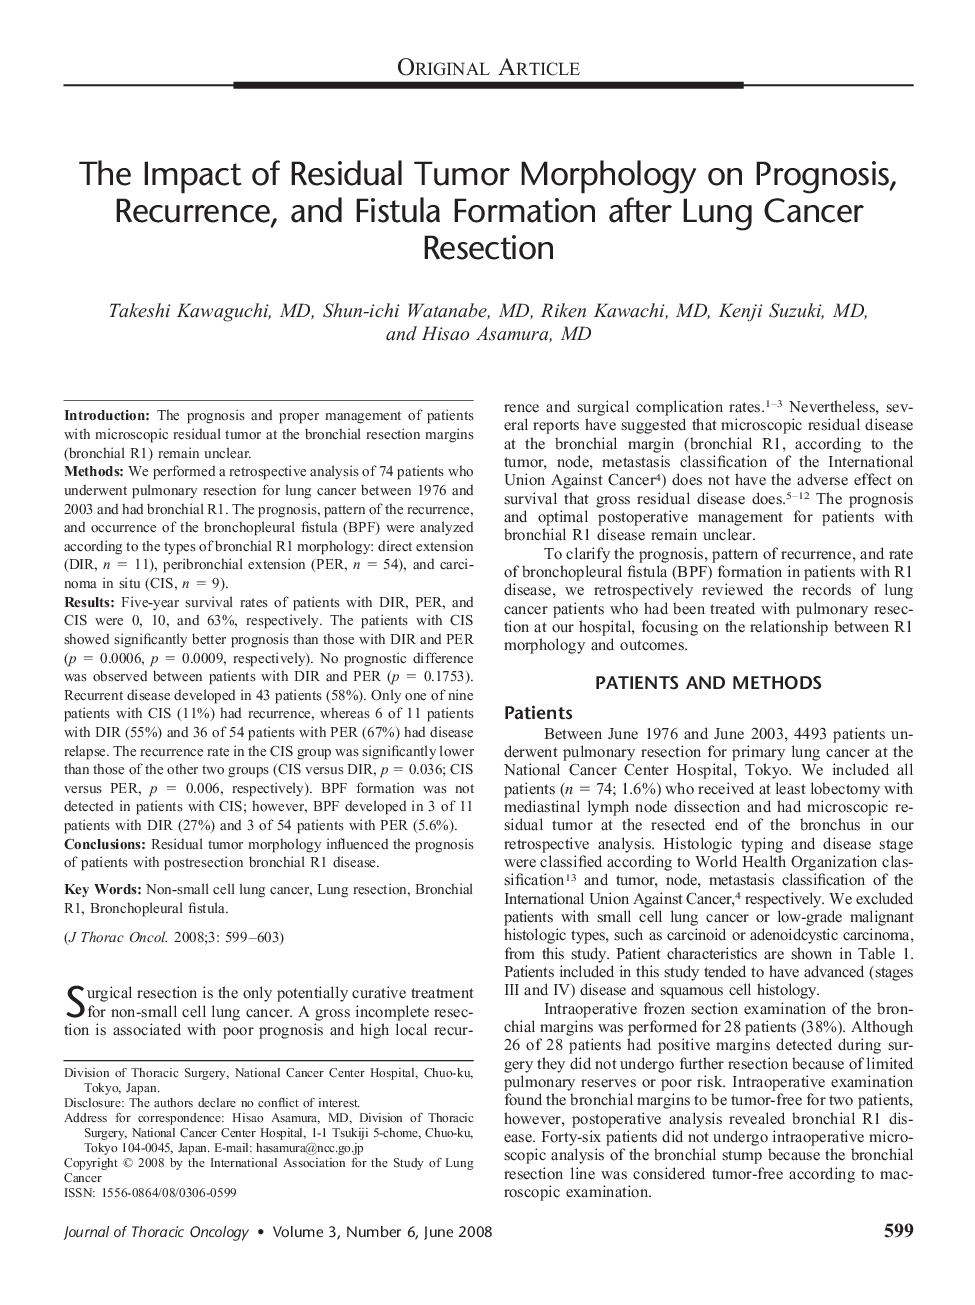 The Impact of Residual Tumor Morphology on Prognosis, Recurrence, and Fistula Formation after Lung Cancer Resection 